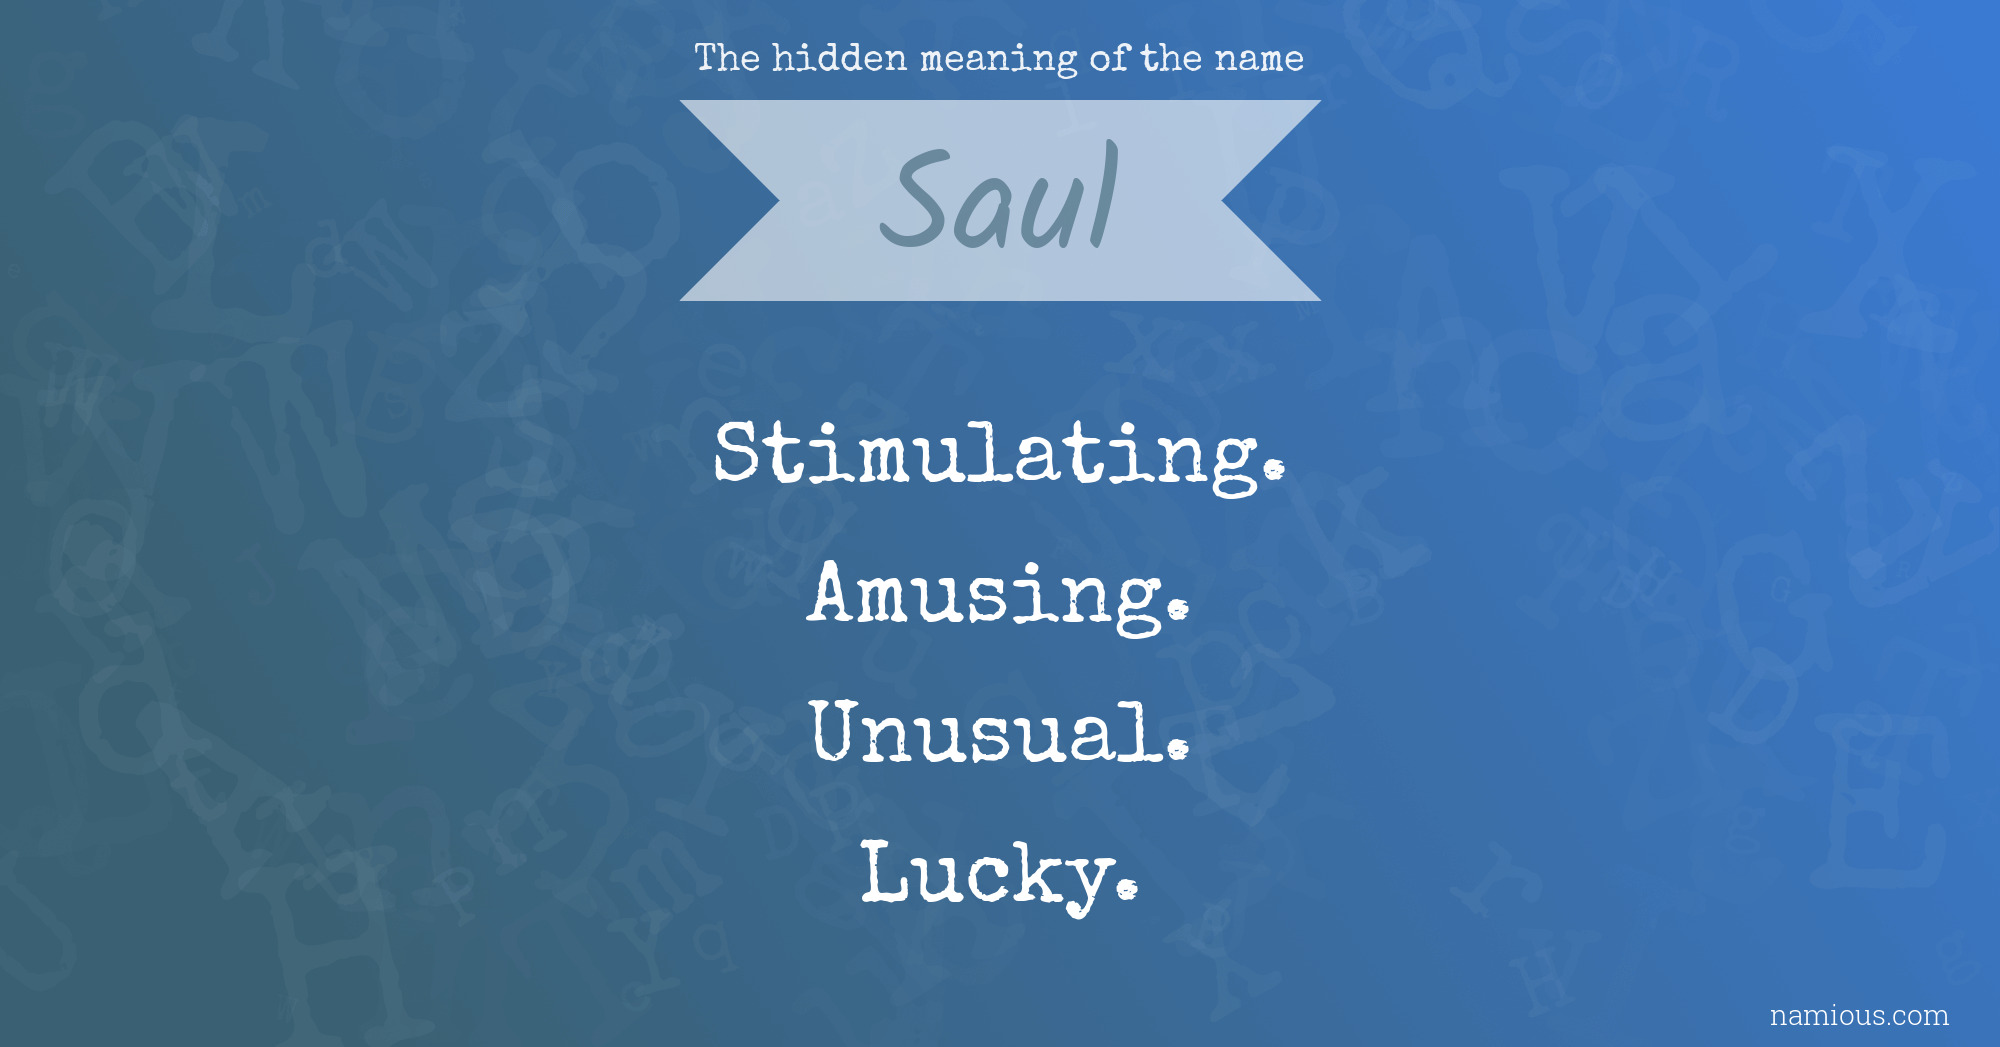 The hidden meaning of the name Saul